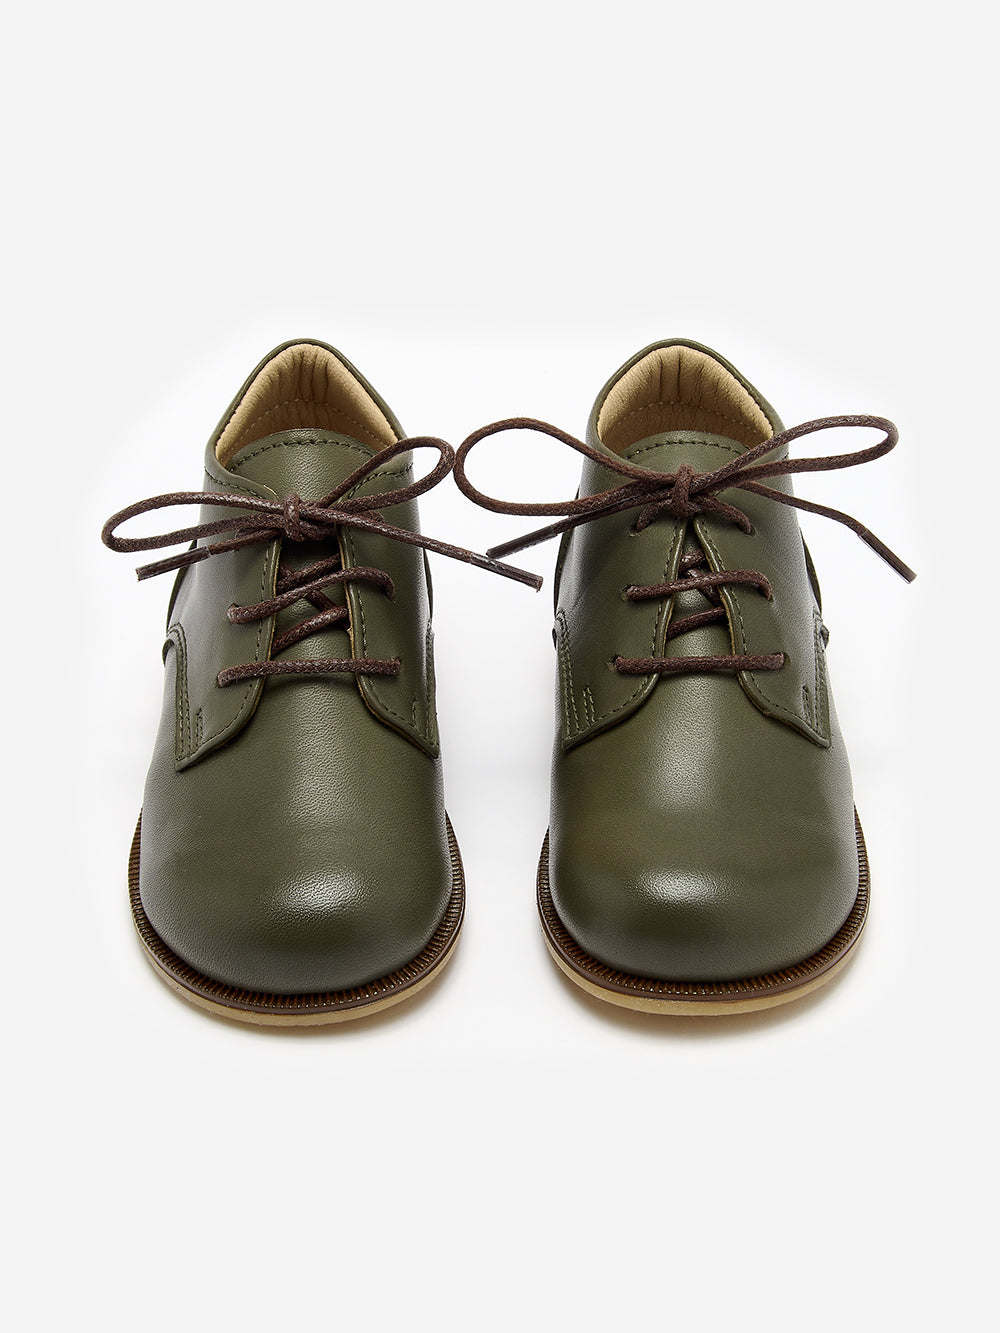 Green Leather Toddler Boots